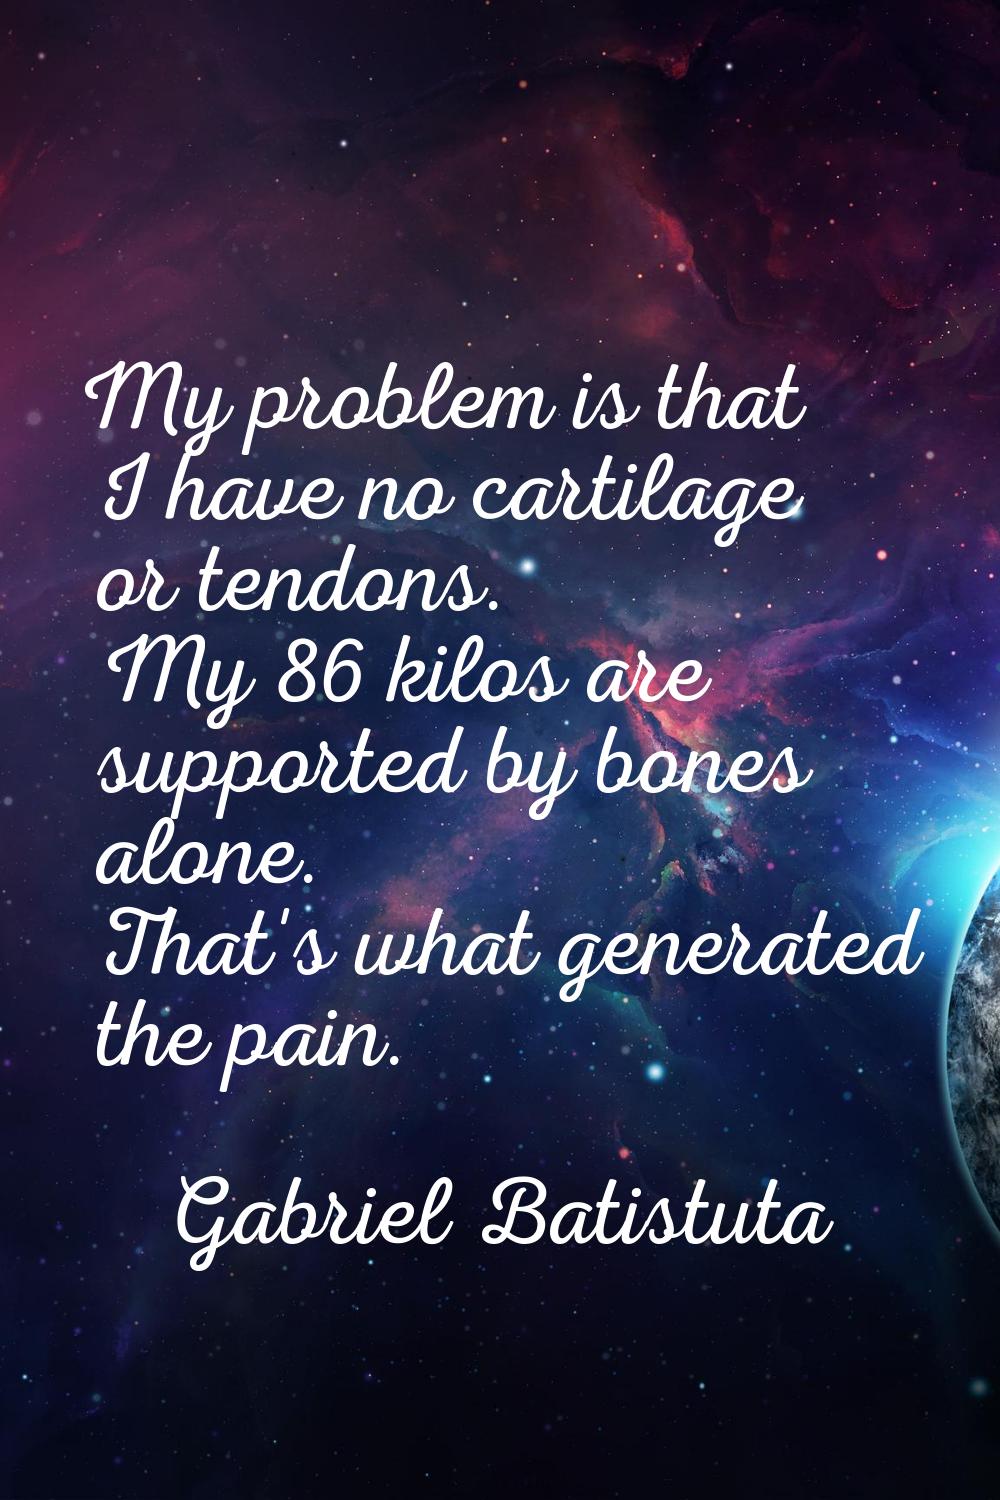 My problem is that I have no cartilage or tendons. My 86 kilos are supported by bones alone. That's